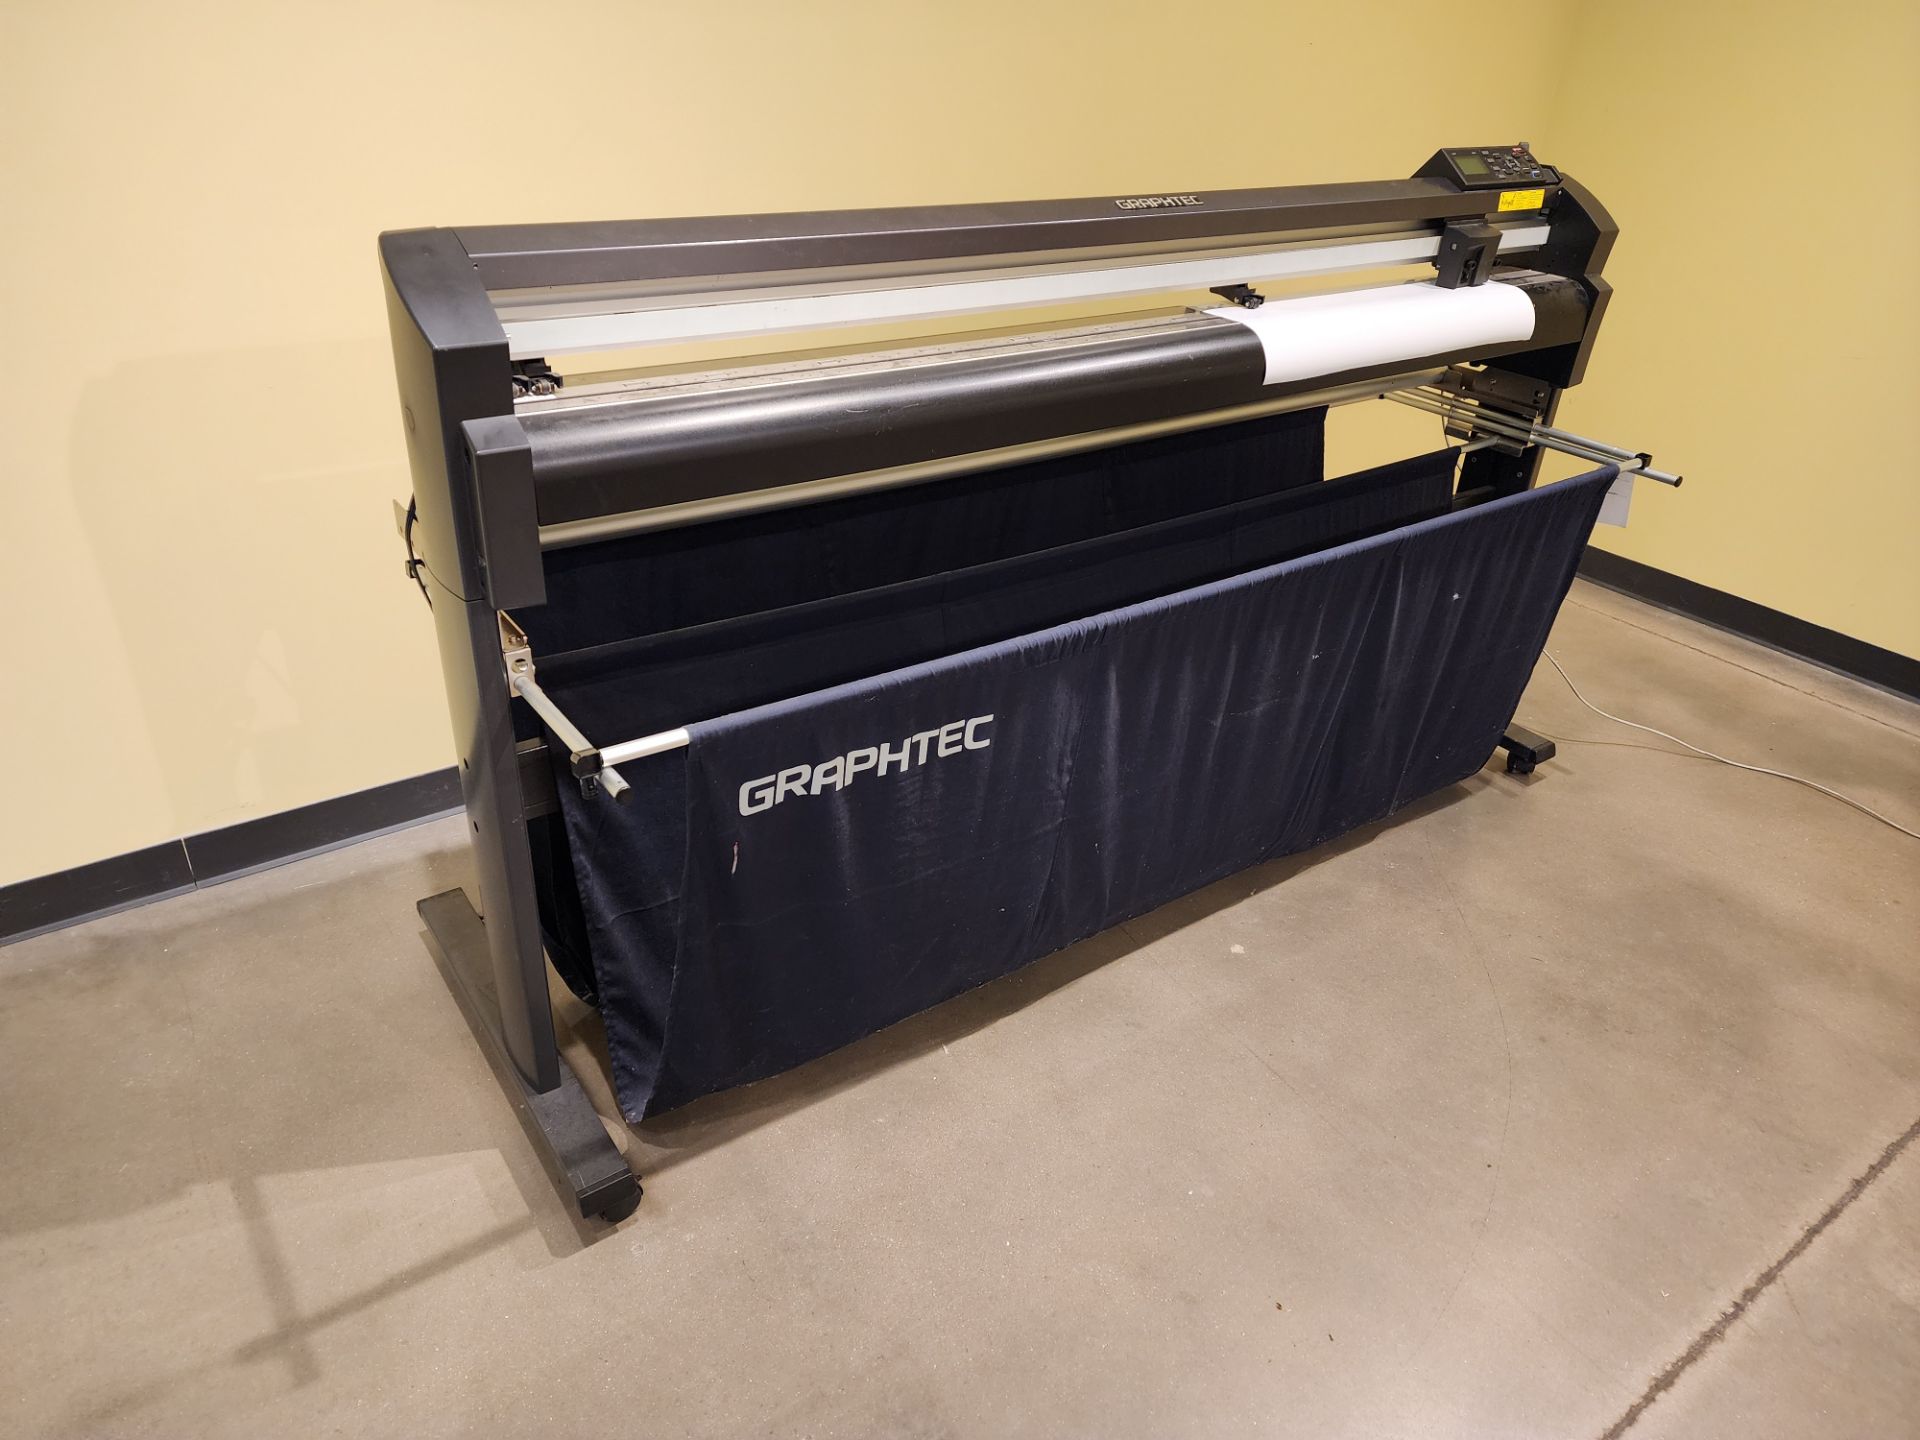 Graphtec Model FC8000-160 Cutting Plotter, S/N 20120301 A20331412 - Image 2 of 9